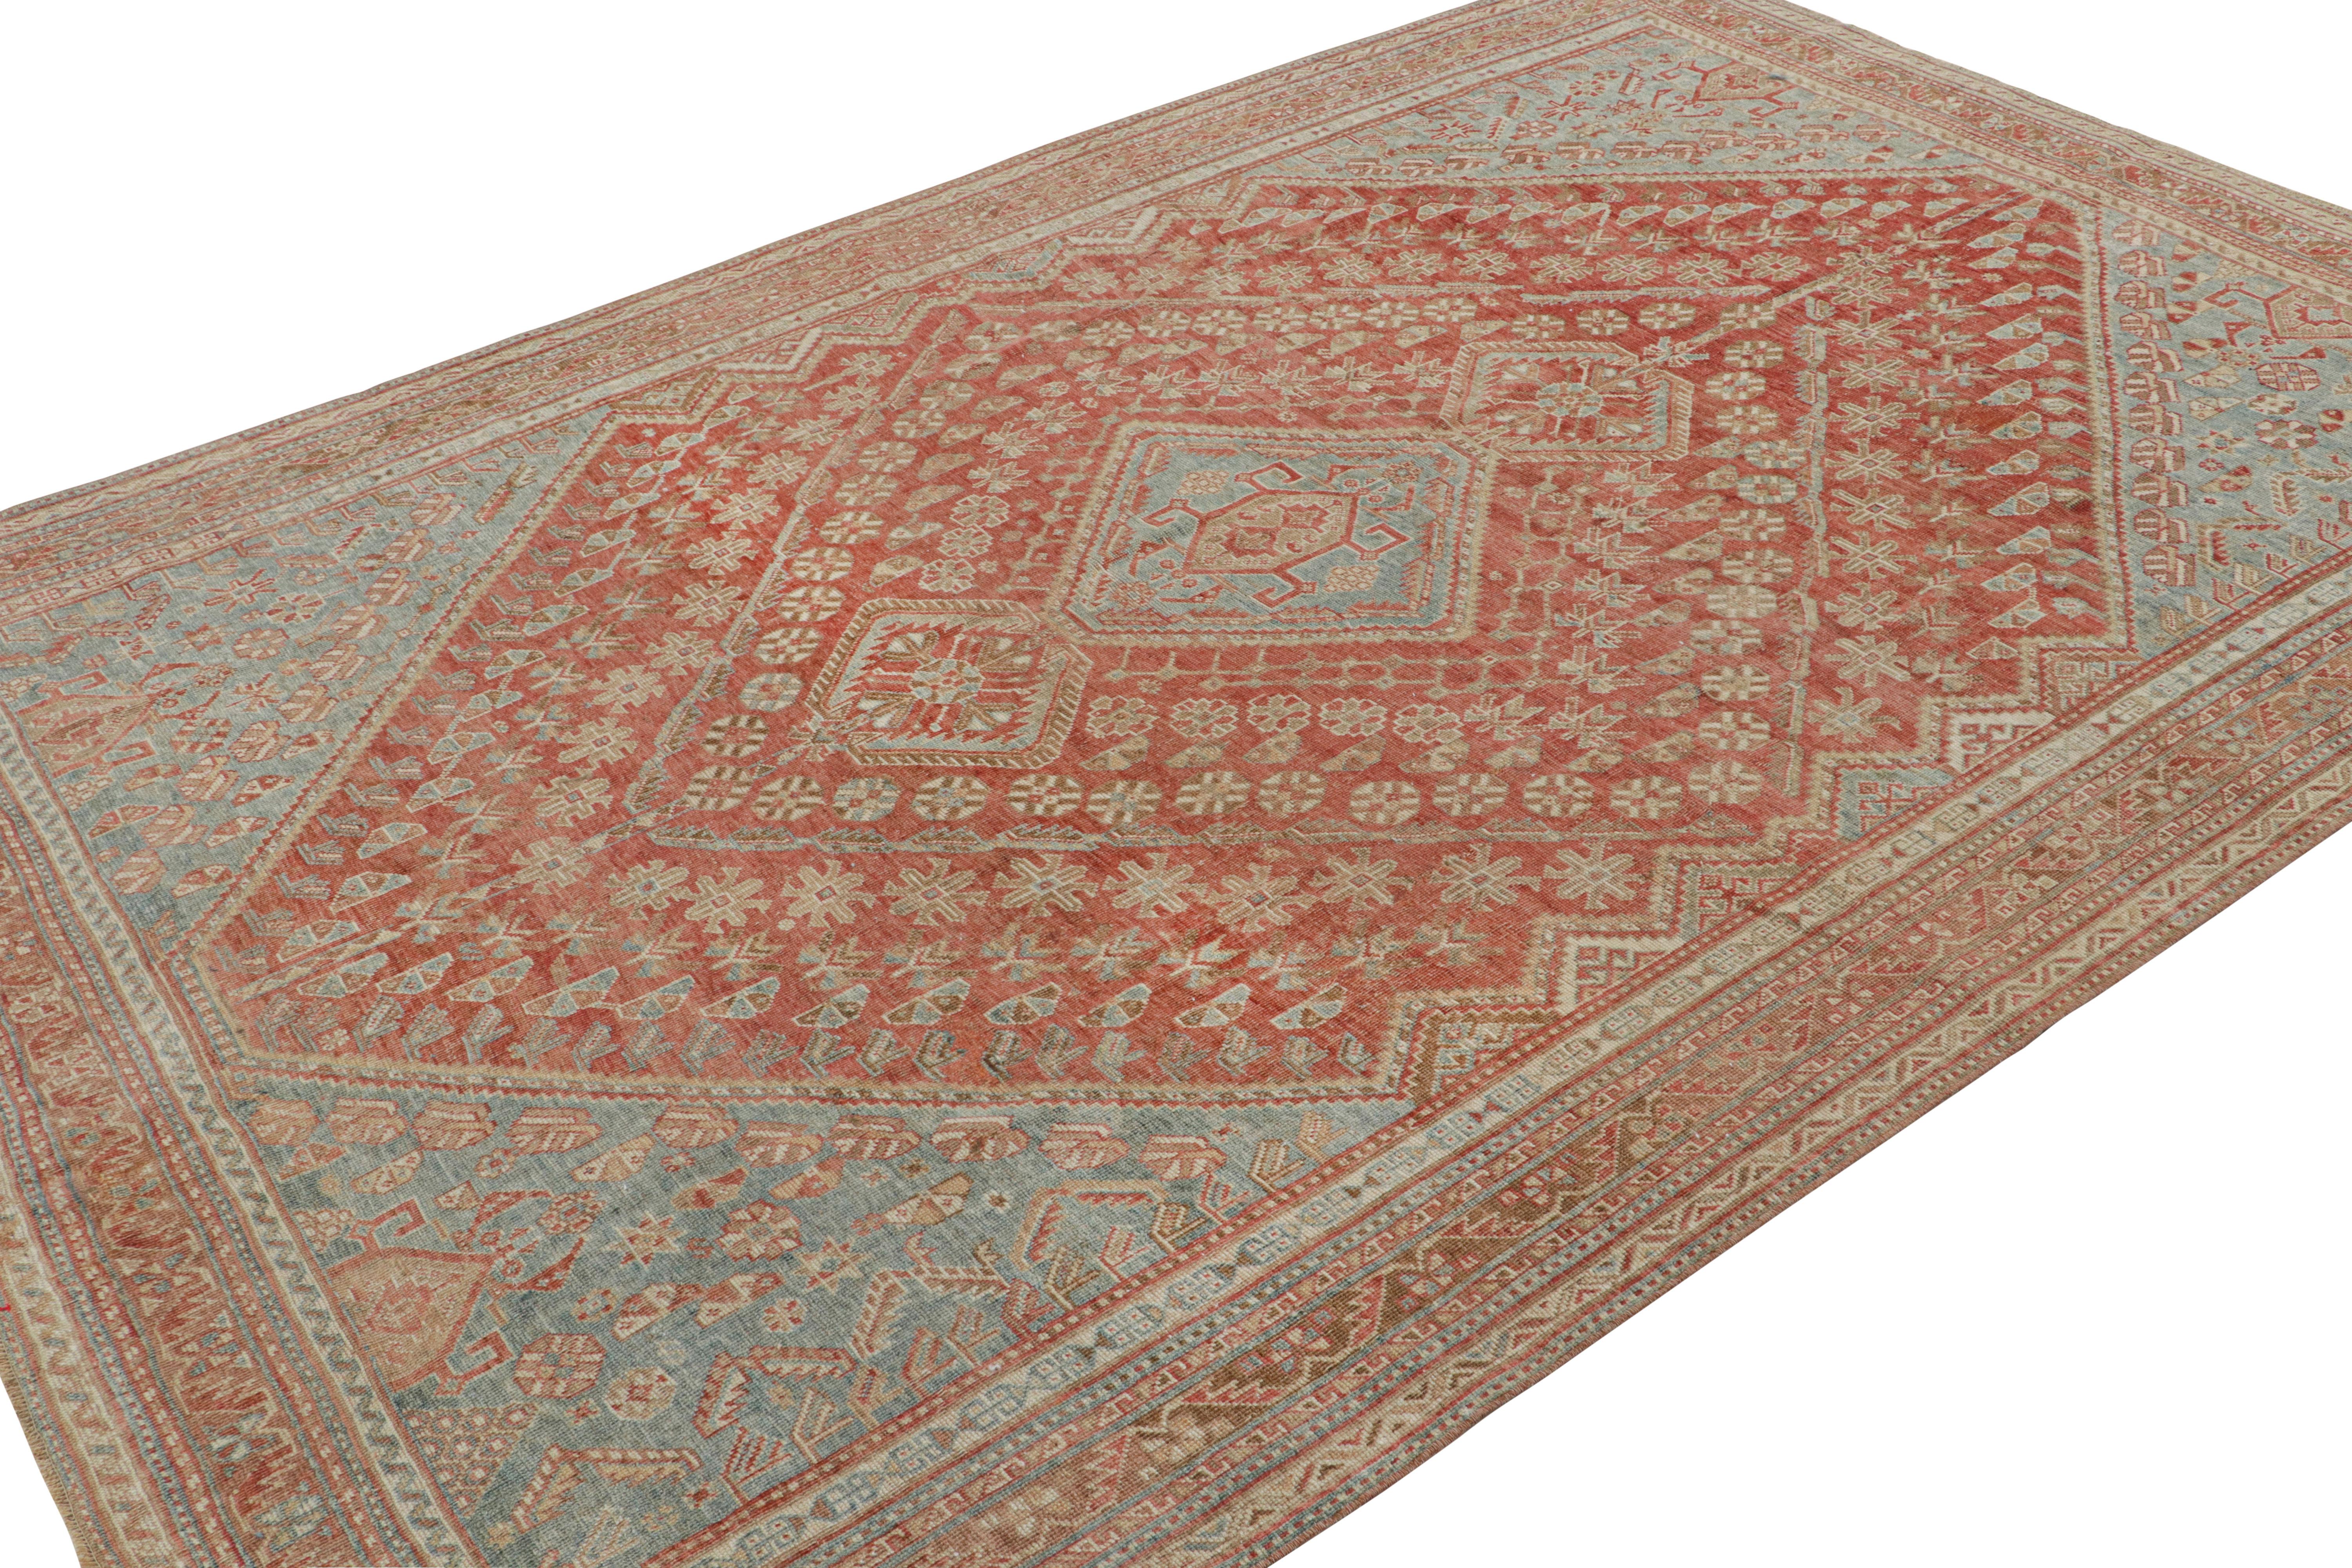 Indian Vintage Ersari Rug in Red with Blue and Beige-Brown Patterns, from Rug & Kilim For Sale